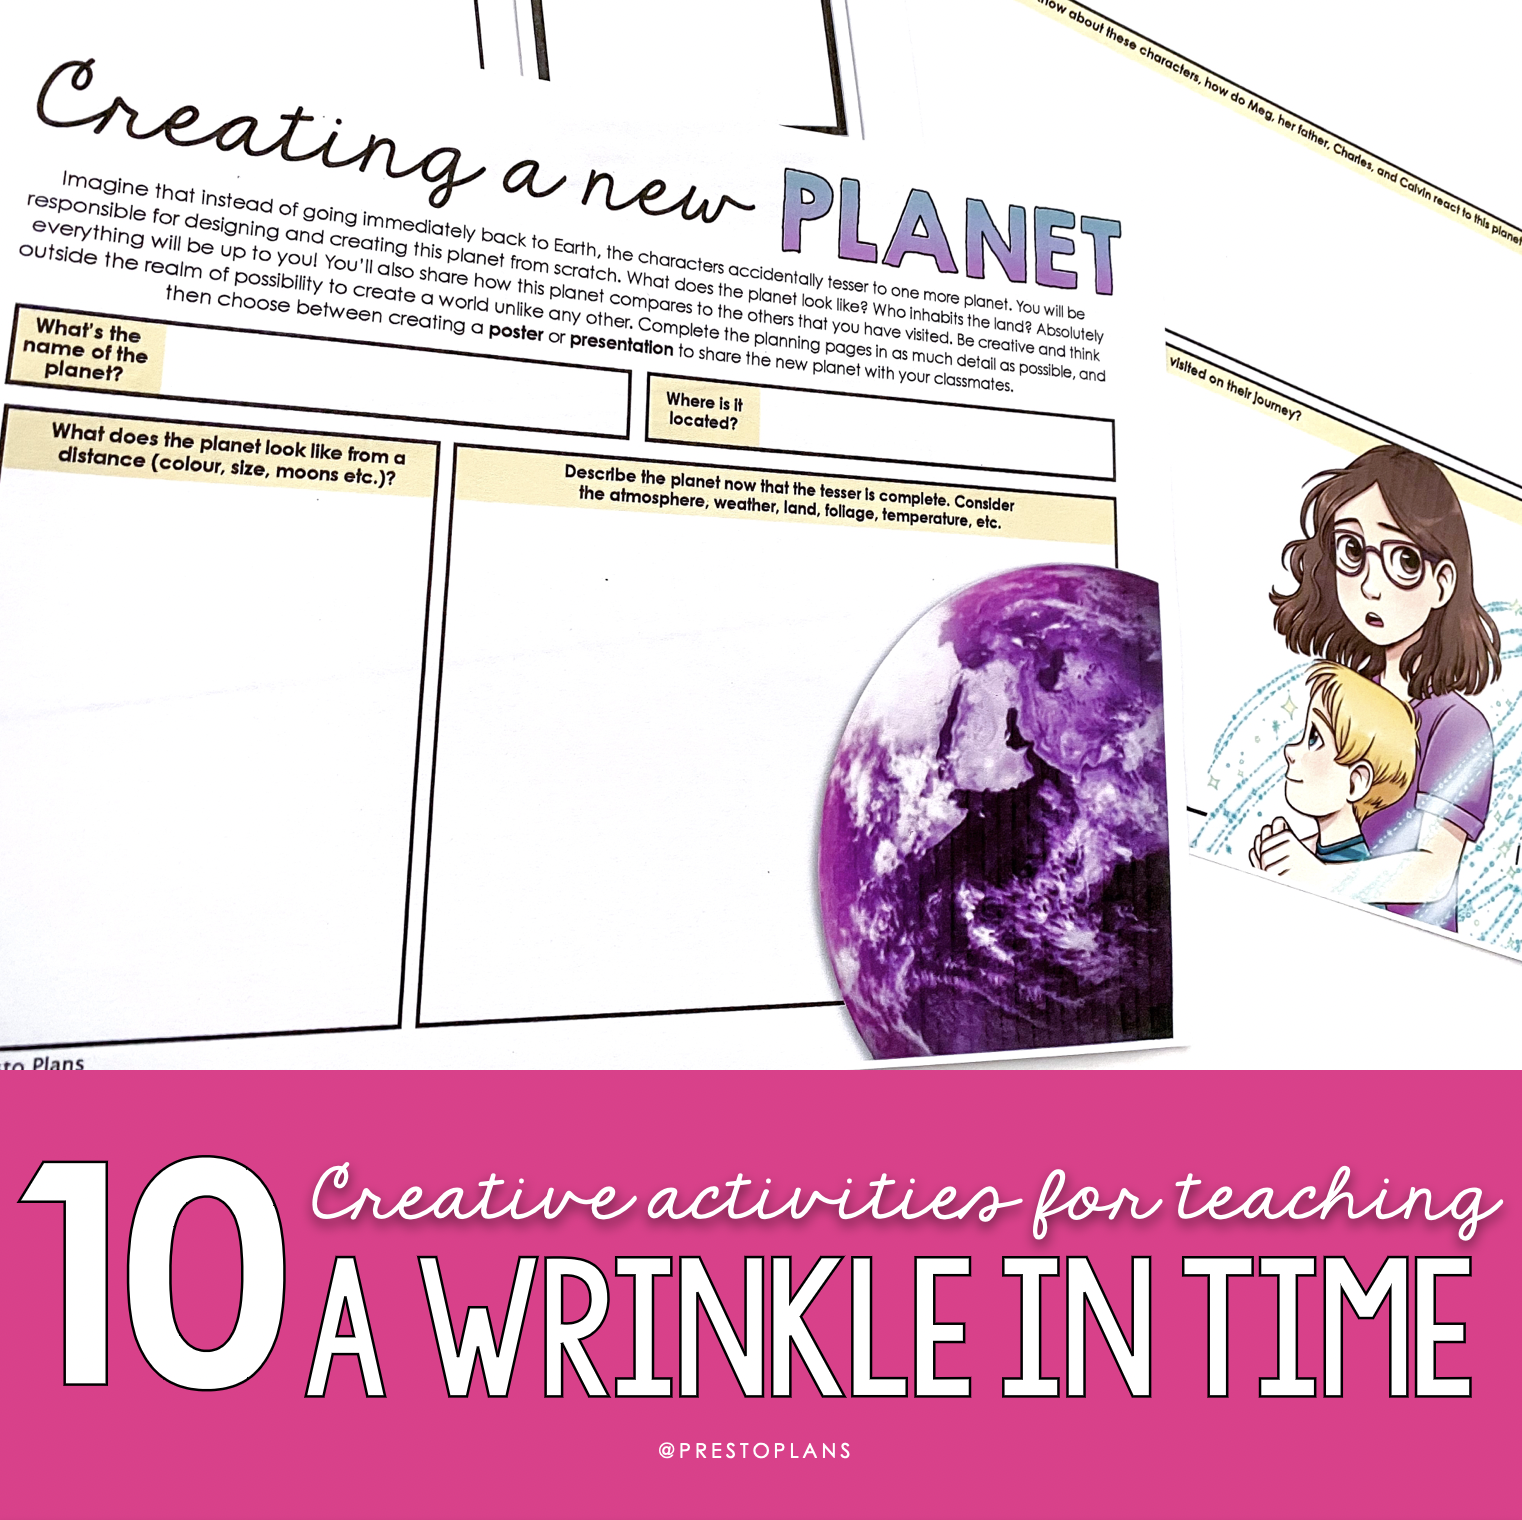 10 creative activities for teaching A Wrinkle in Time